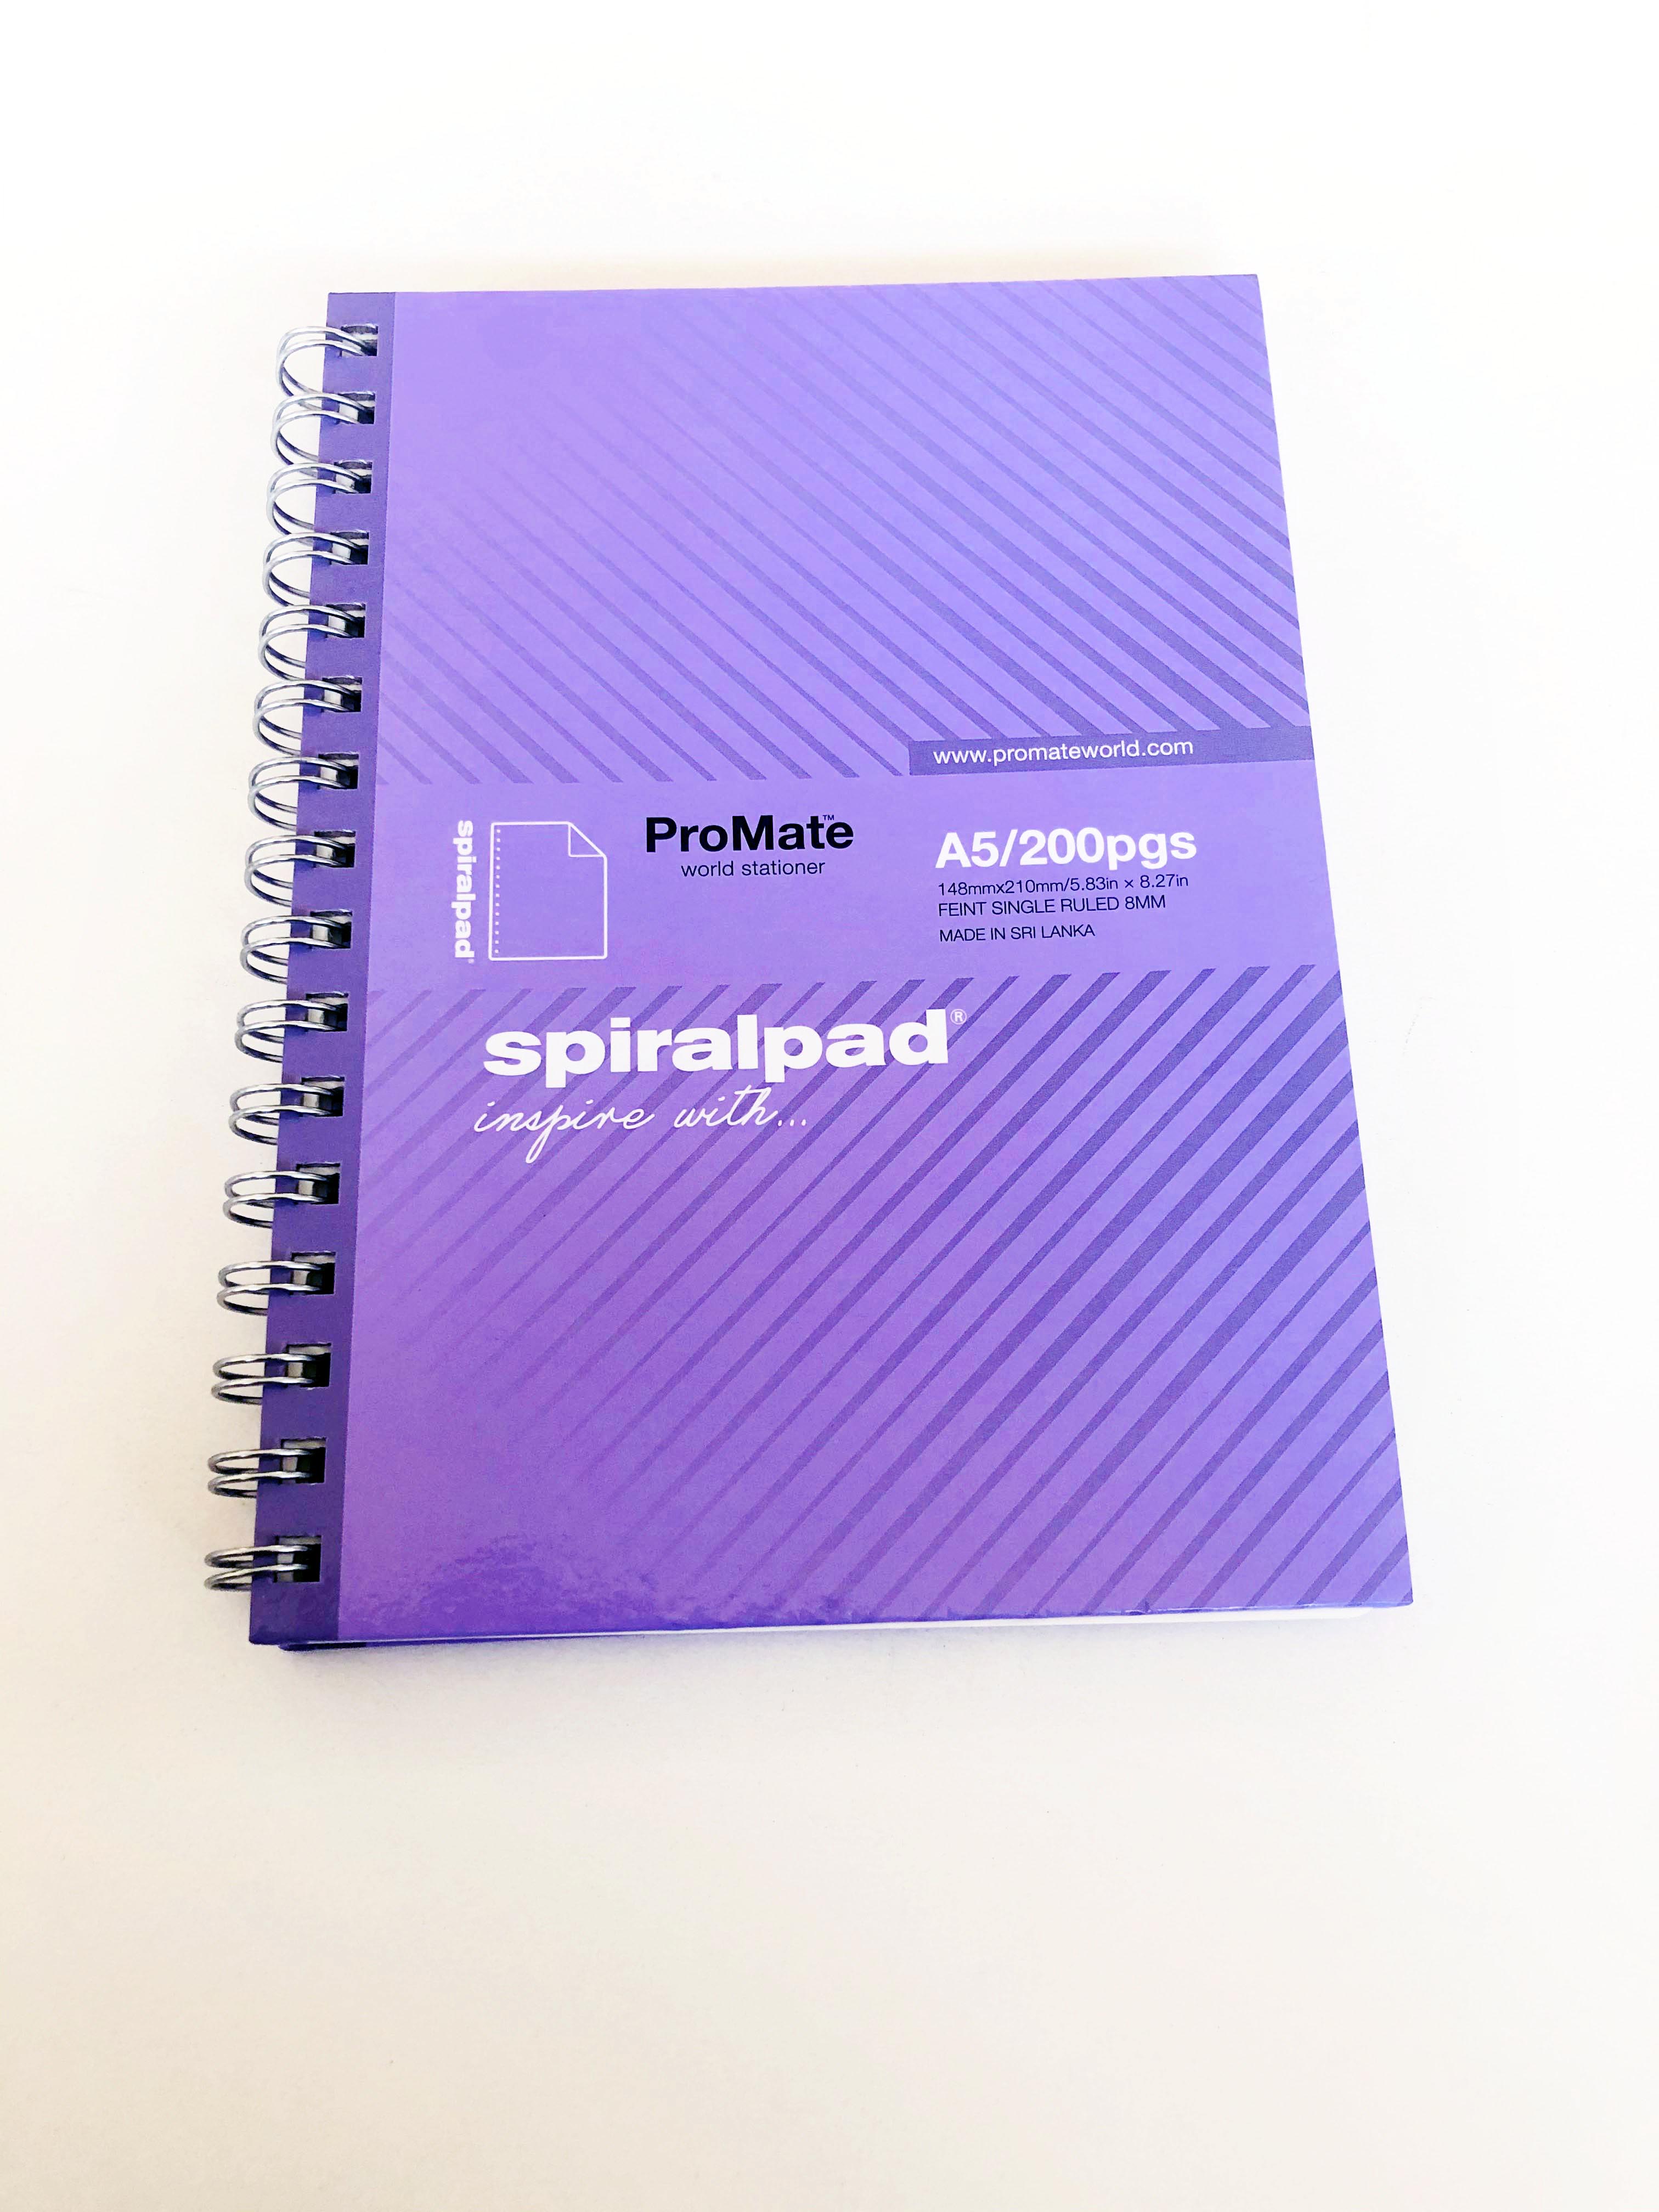 Promate A5 Spiralpad Hard Cover 200 Pages